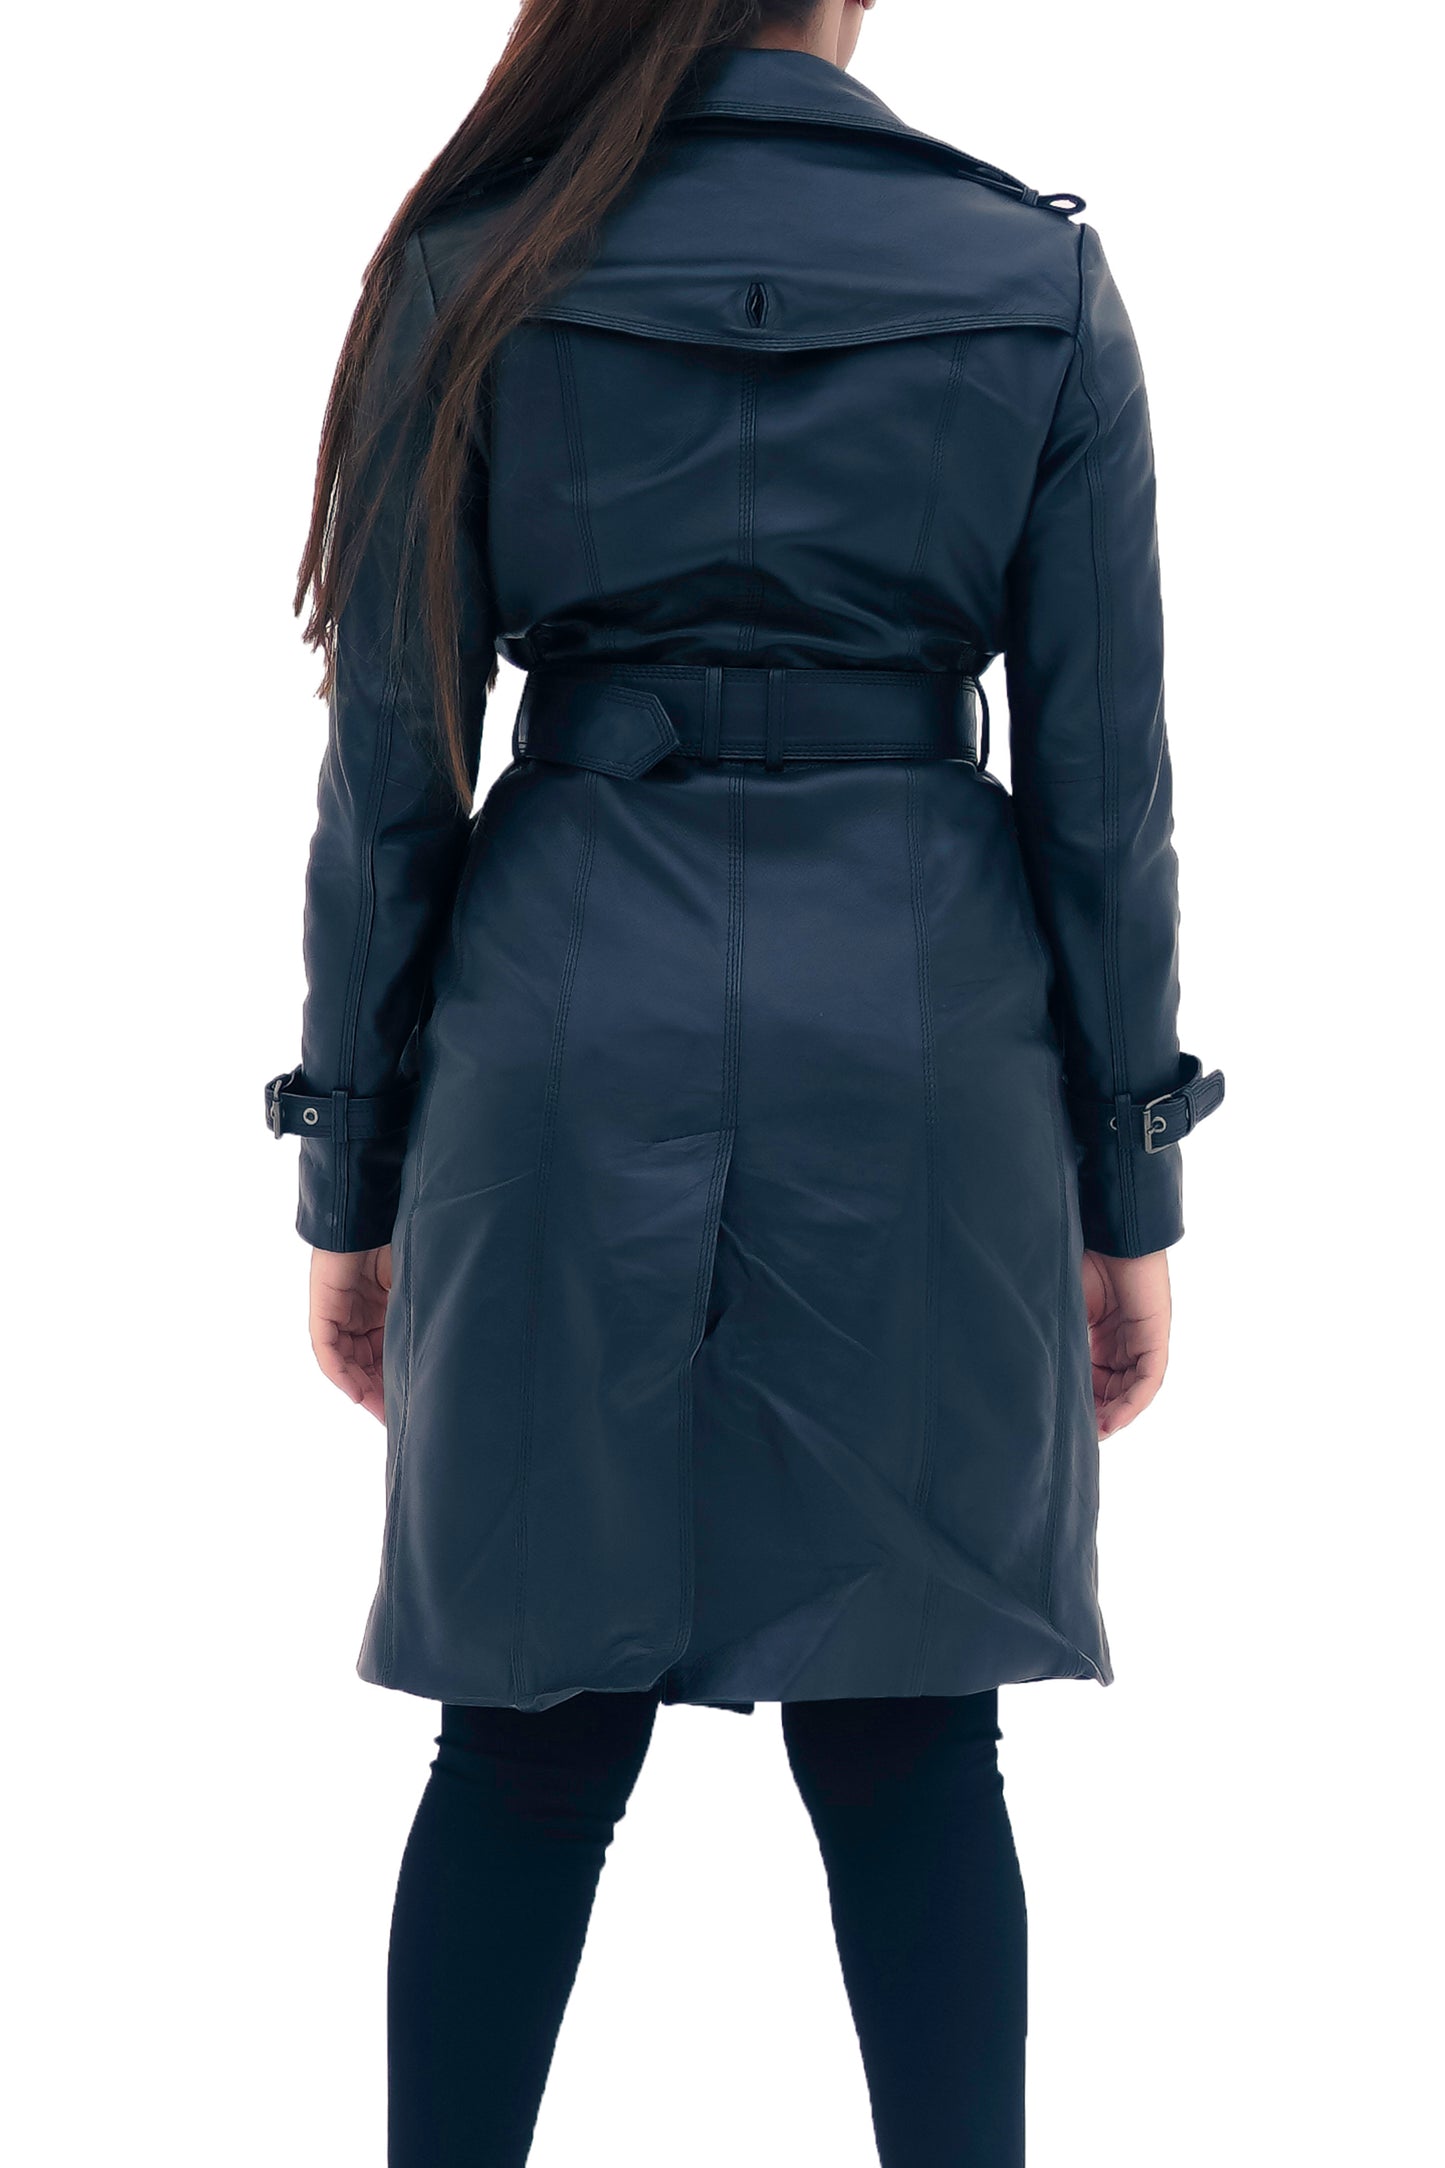 New Ladies Women Black Weather Protective Genuine Real Leather Long Trench Coat